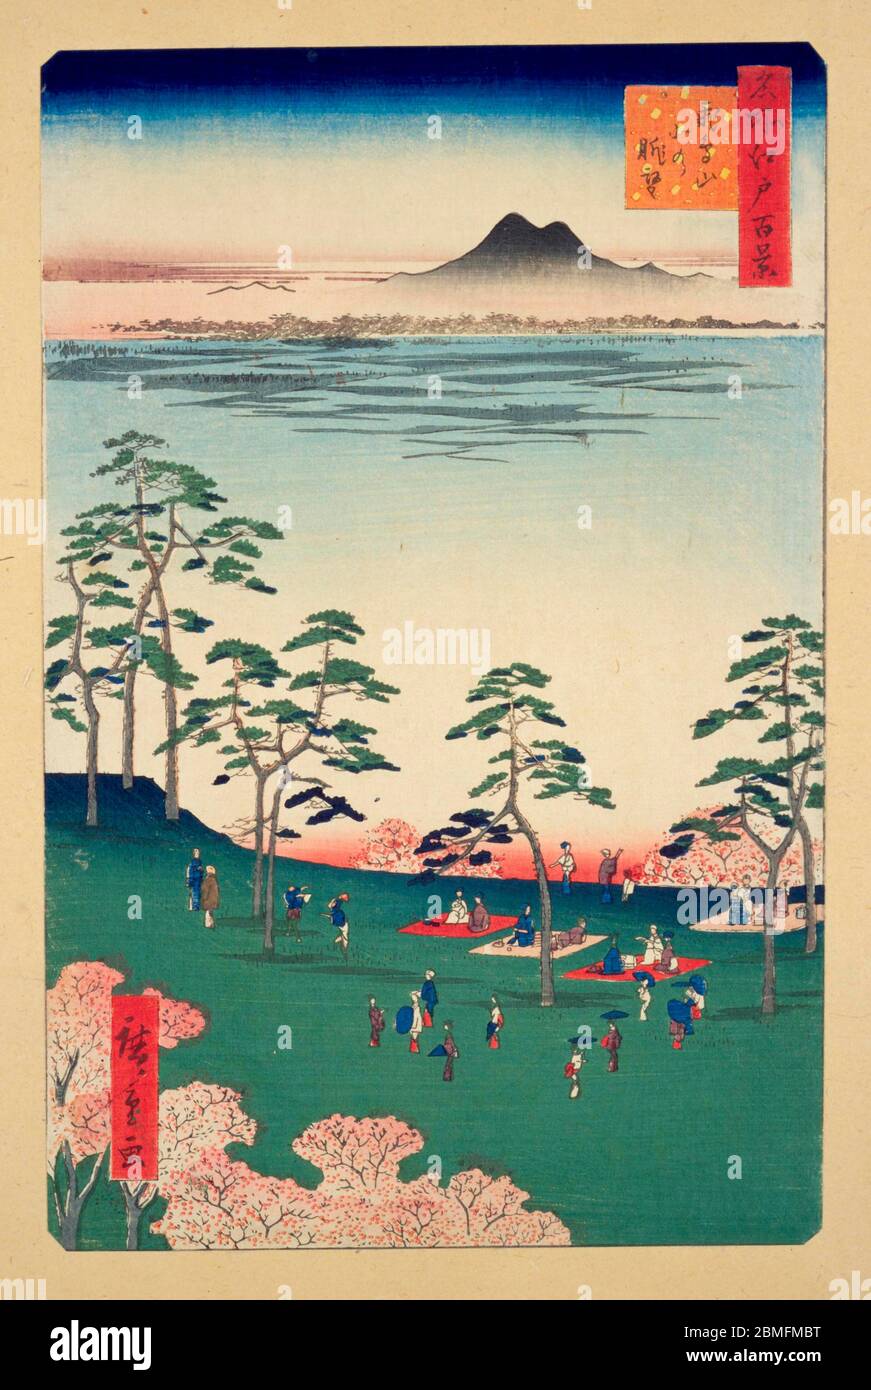 [ 1850s Japan - Cherry Blossom Viewing ] —   People enjoying hanami (cherry blossom viewing) at Asukayama Park in Edo (current Tokyo), 1856 (Ansei 3). In the distance, Mount Tsukuba can be seen.  This woodblock print is image 17 in One Hundred Famous Views of Edo (名所江戸百景, Meisho Edo Hyakkei), a series created by ukiyoe artist Utagawa Hiroshige (歌川広重, 1797–1858).  It is one of 42 spring scenes in the series.  Title: View to the North from Asukayama (飛鳥山北の眺望, Asukayama kita no chobo)  19th century vintage Ukiyoe woodblock print. Stock Photo